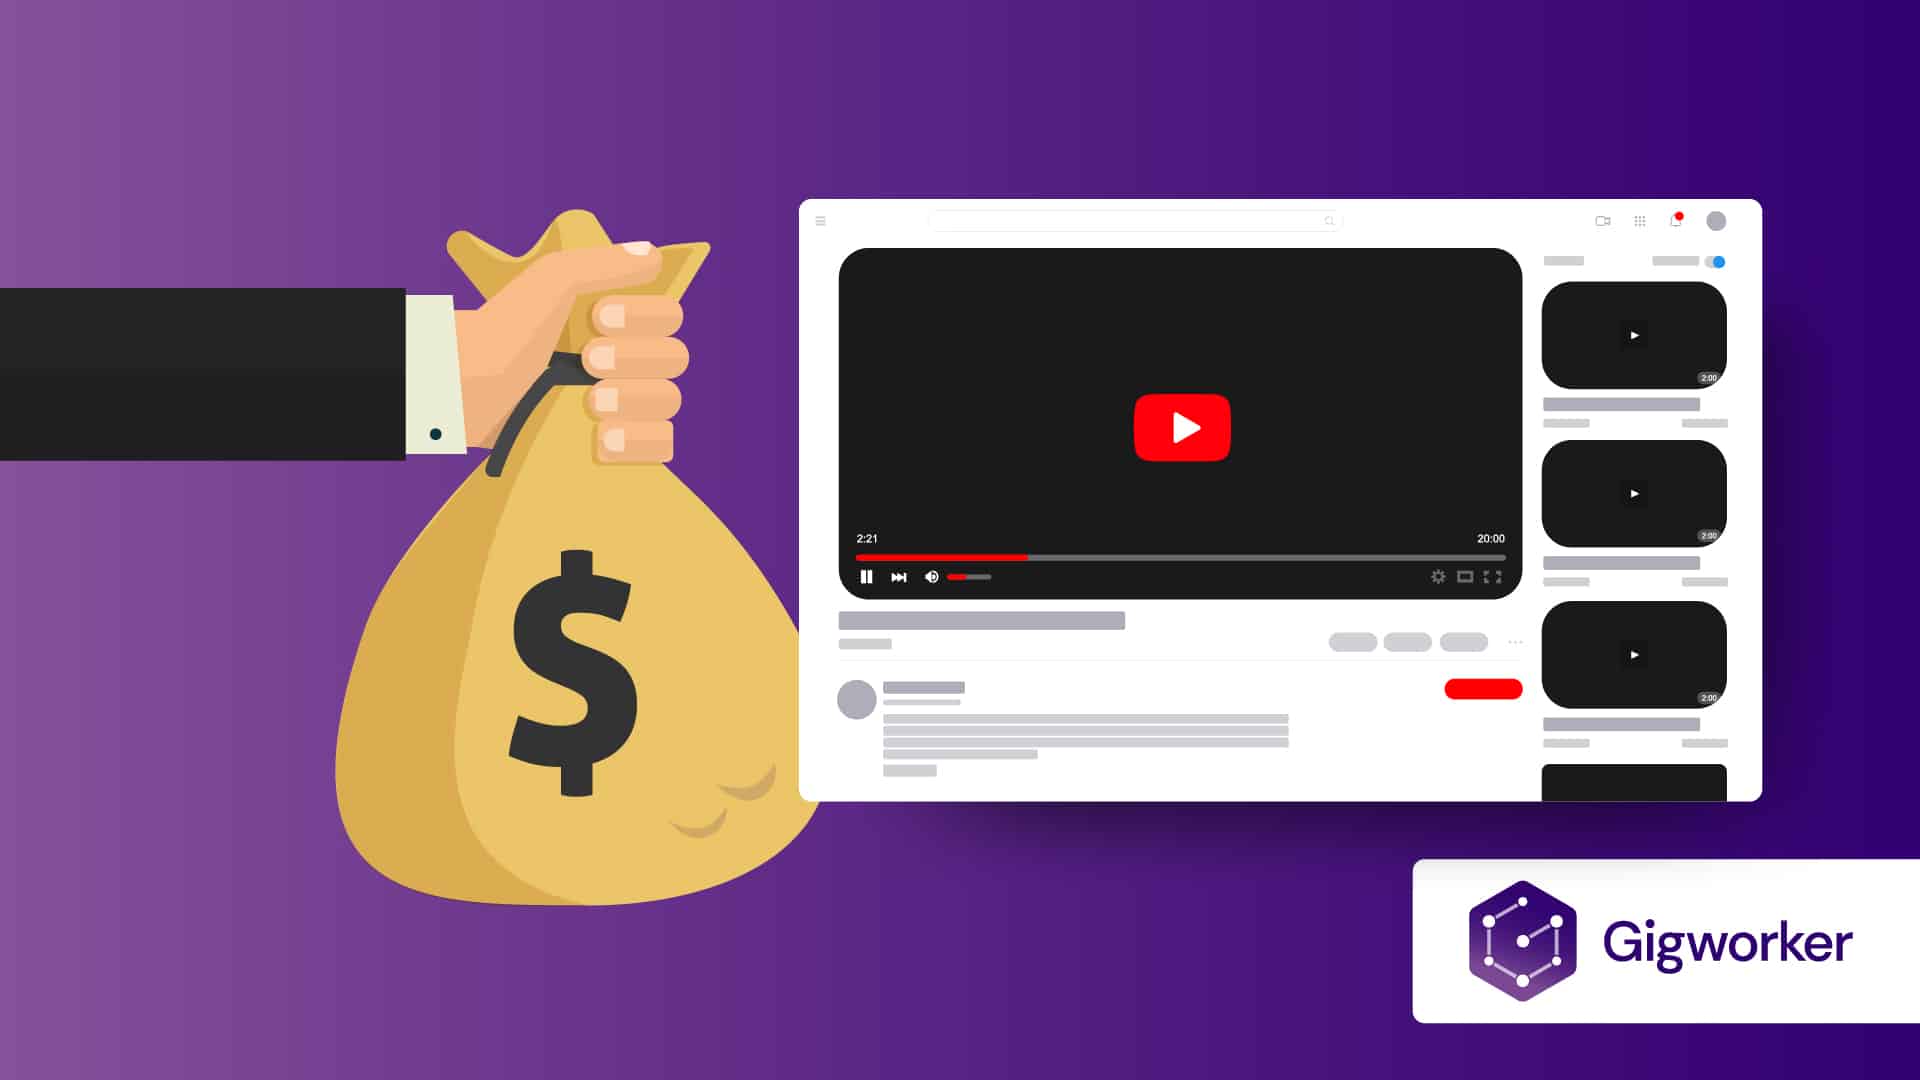 vector graphic showing an illustration of a hand holding a bag with a dollar sign and shows how to get paid to watch youtube videos